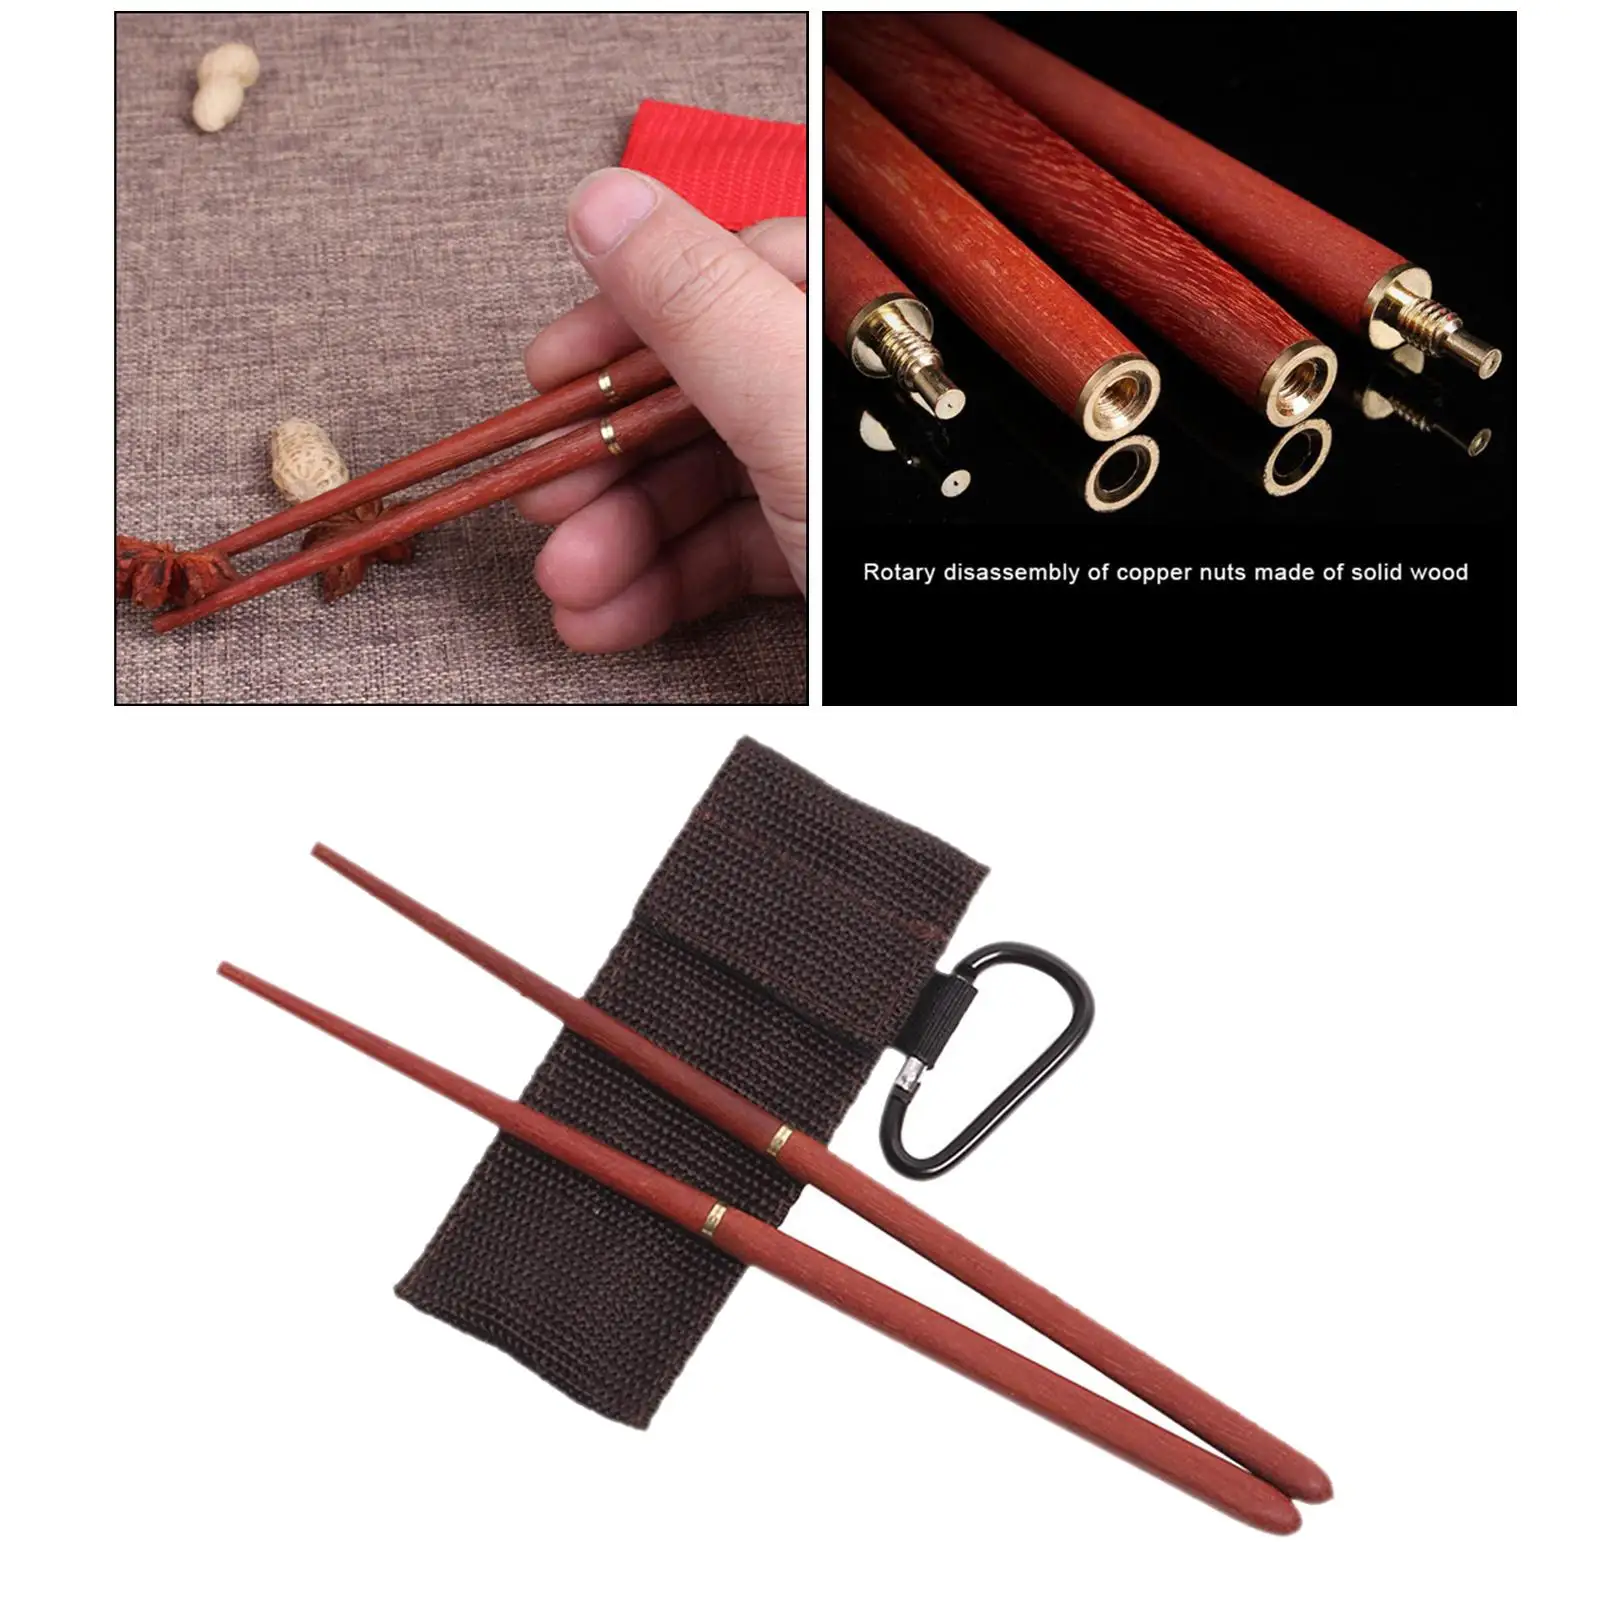  Collapsible Wooden Chopsticks Tableware Practical Camping School BBQ